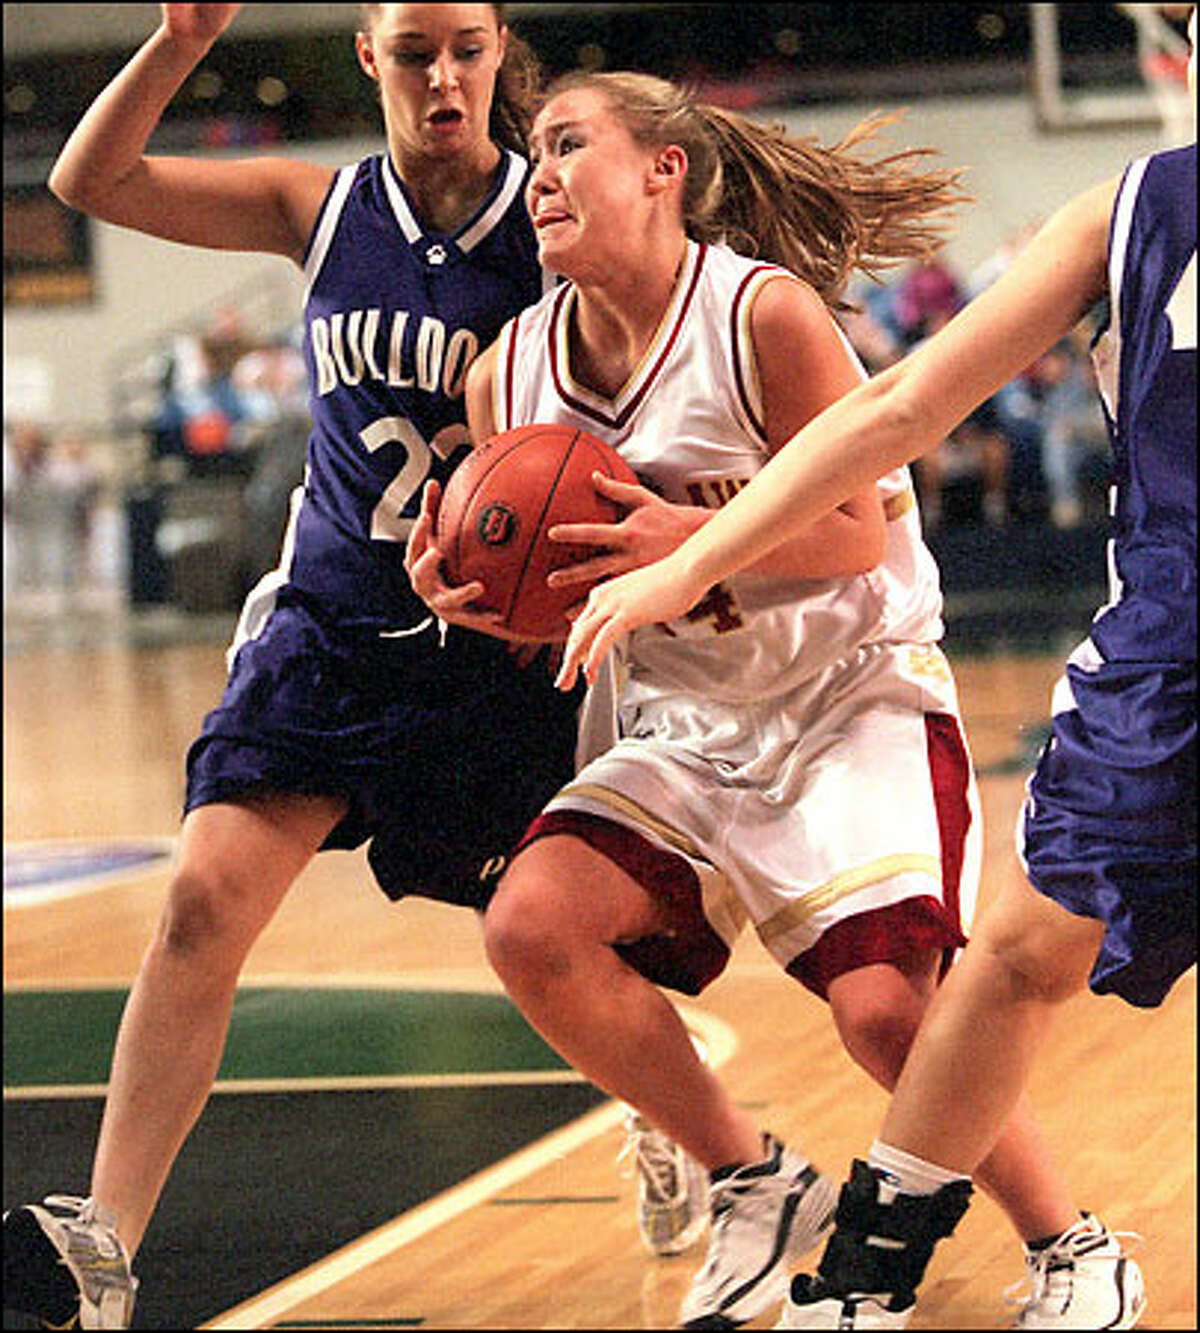 Enumclaw’s Jenny Poe drives against Pasco in the 2001 state tournament. Poe returned to play Thursday after missing two weeks because of a knee injury.